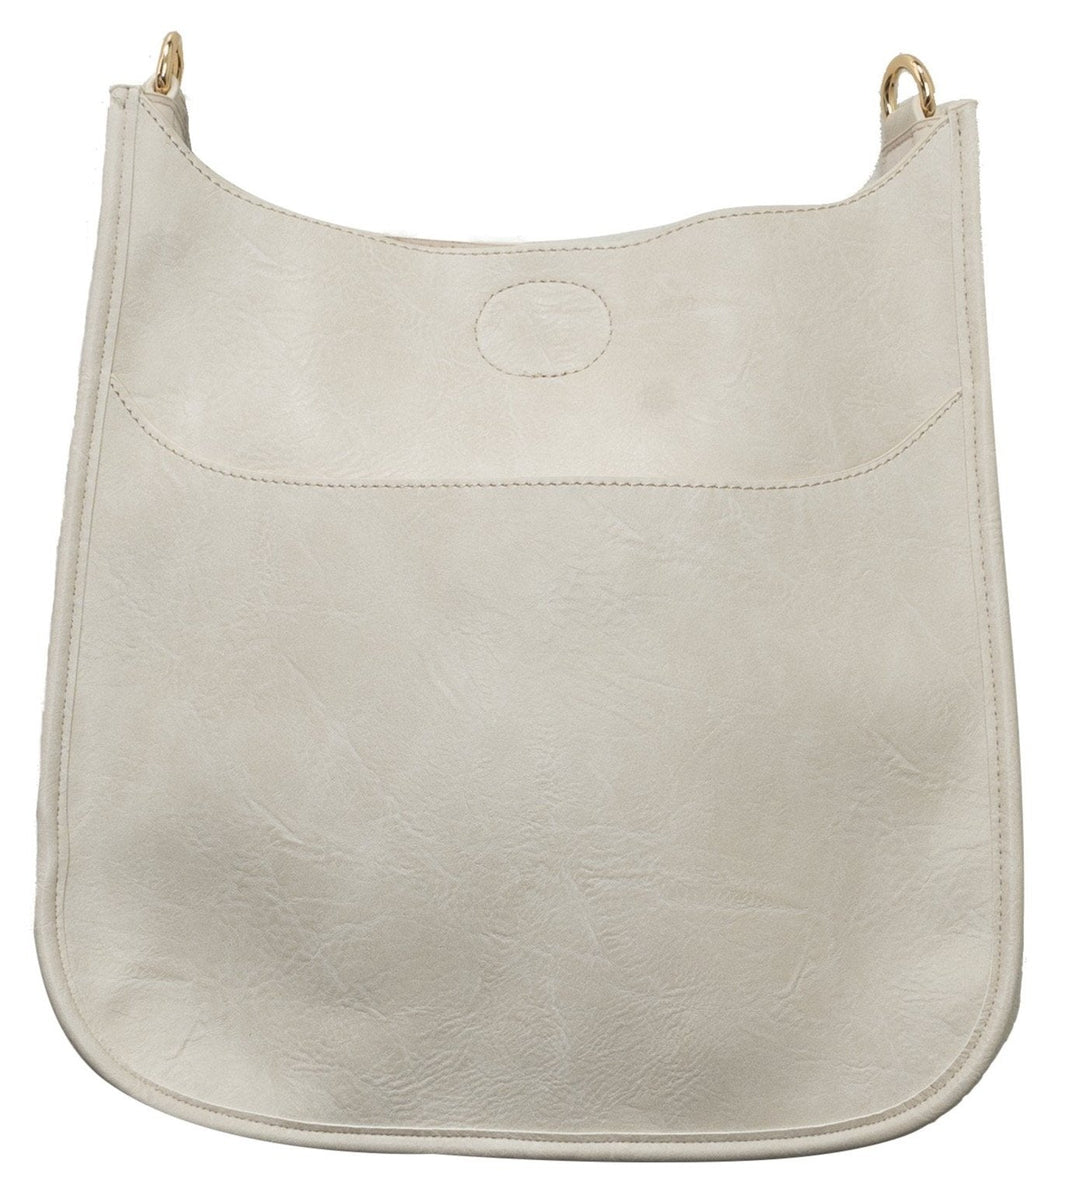 Ahdorned-Vegan Leather Classic Size Bag (No Strap) -Cream - Shorely Chic Boutique